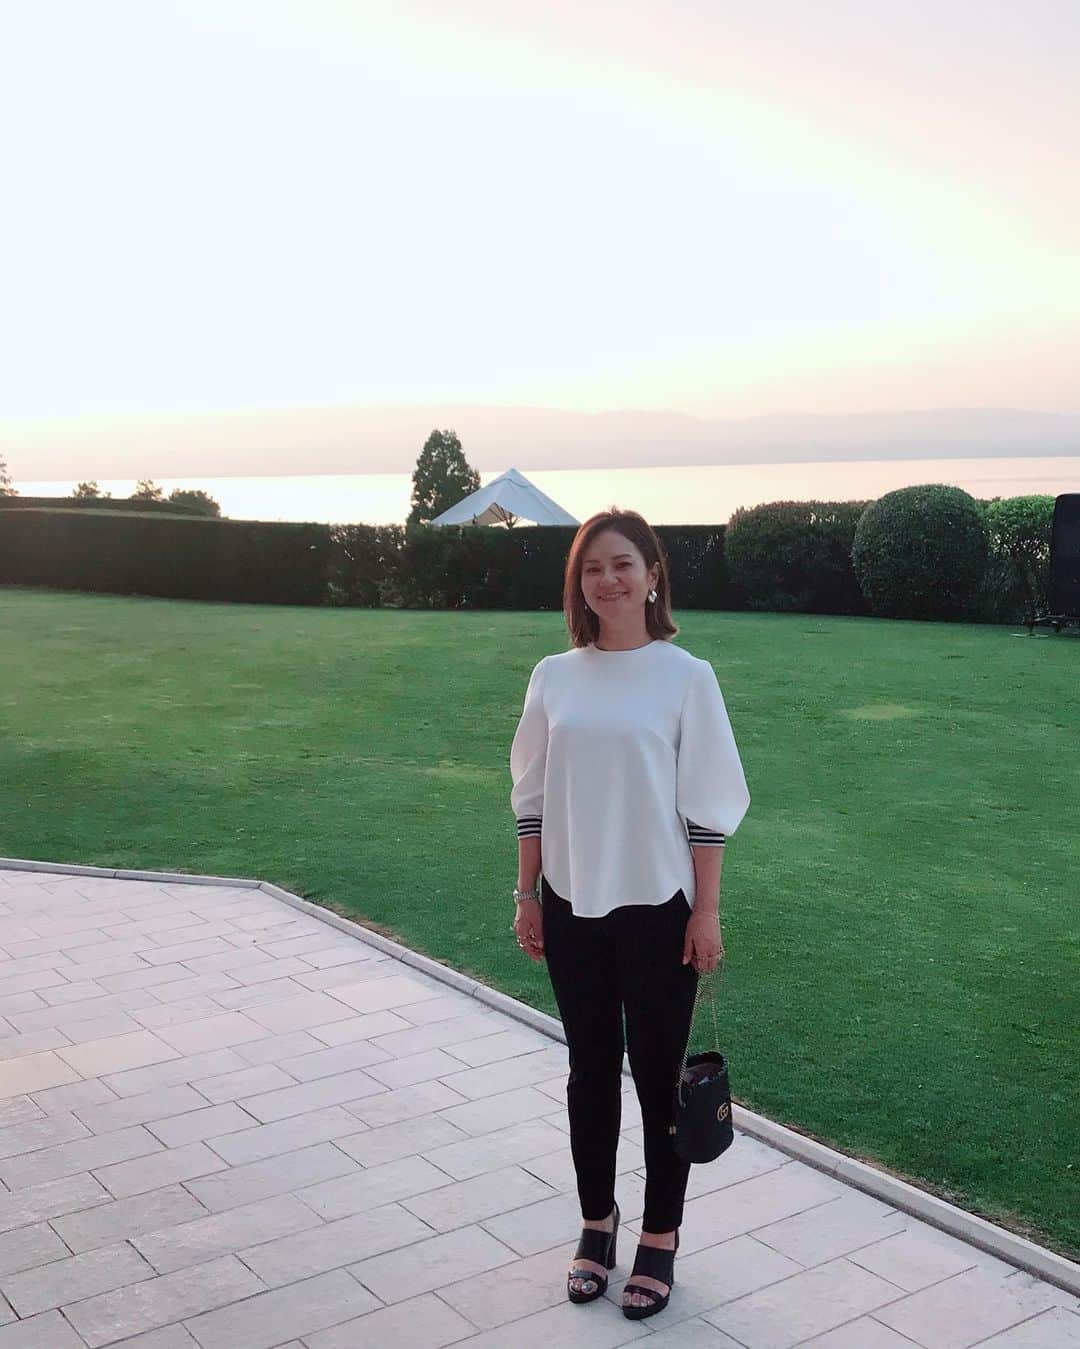 宮里藍さんのインスタグラム写真 - (宮里藍Instagram)「Got into Evian this morning! Going to the golf course in the afternoon to see my friends on the tour is absolutely great because I missed them so much!!:)) Also attending the gala dinner tonight. This is the first event to come back on the LPGA after I retired. This really makes me happy😊❤️❤️❤️ It was an honor to meet #alainboghossian in person. Not many chances to meet the #wcupchampion ! Great first day and looking forward to seeing the first round tomorrow!!! @evianchamp #magicplace #sogreatful  今朝エビアンに到着しました！午後はコースに行ってツアーの友達や、関係者に沢山のハグと近況報告が出来ました☺️✨話に夢中になって写真撮り忘れましたが。笑  夜はガラディナーへ参加して、この大会の素晴らしさを思い出し、改めて2度トロフィーを手に出来た事を嬉しく思います！個人的に #アランボゴシエン さんに会えた事、話しが出来てとても光栄でした！こういう大会を通じて色んな方と交流出来る事は本当に素晴らしい事だと思いました！！充実した初日でしたが、明日からの初日も楽しみです！！！ #メジャー大会 #引退後初のアメリカツアー #皆んなと沢山ハグして #喋りまくり #英語追いつかない 笑 #明日も楽しみ」7月25日 7時38分 - ai_miyazato